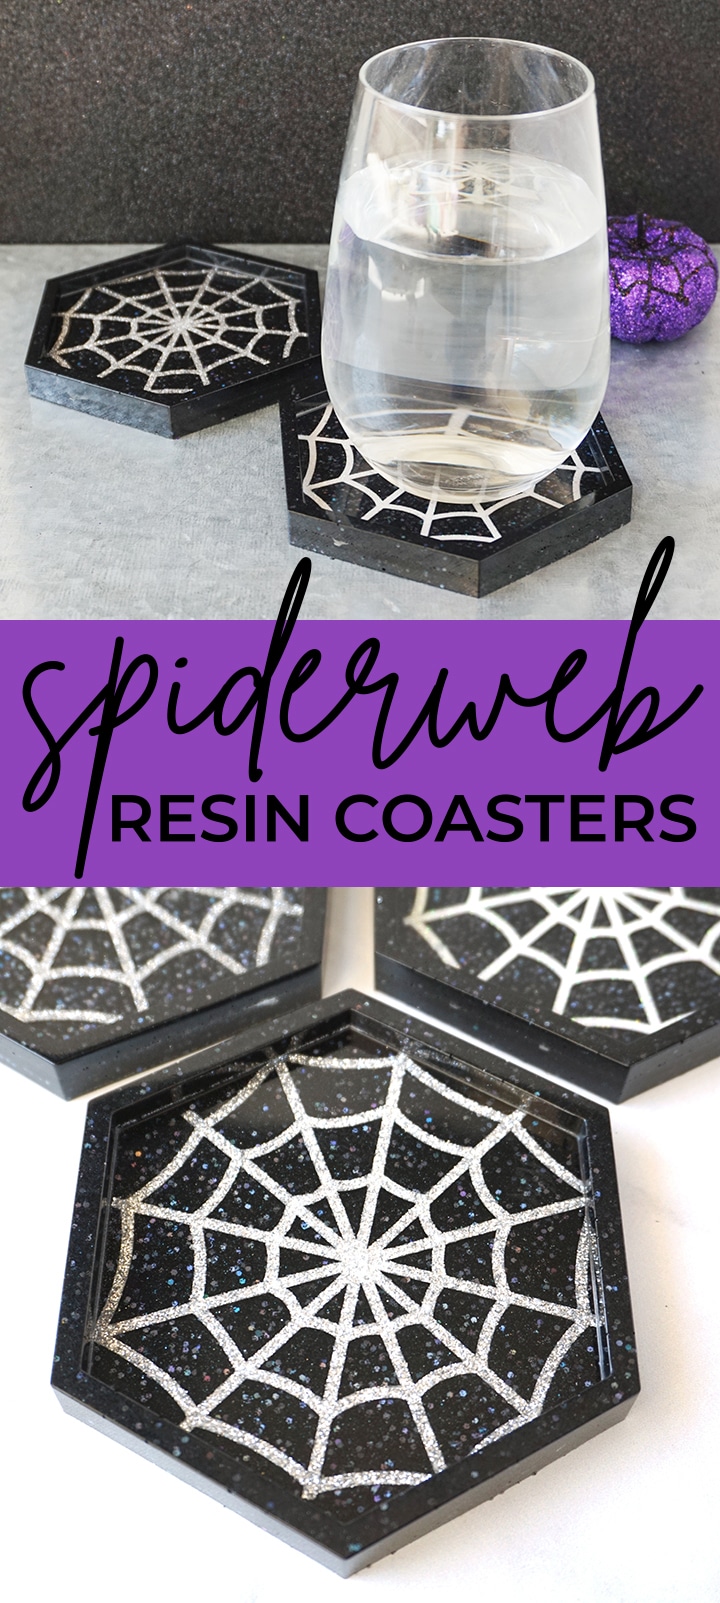 How to make Spiderweb Resin Coasters - perfect for Halloween! via @resincraftsblog